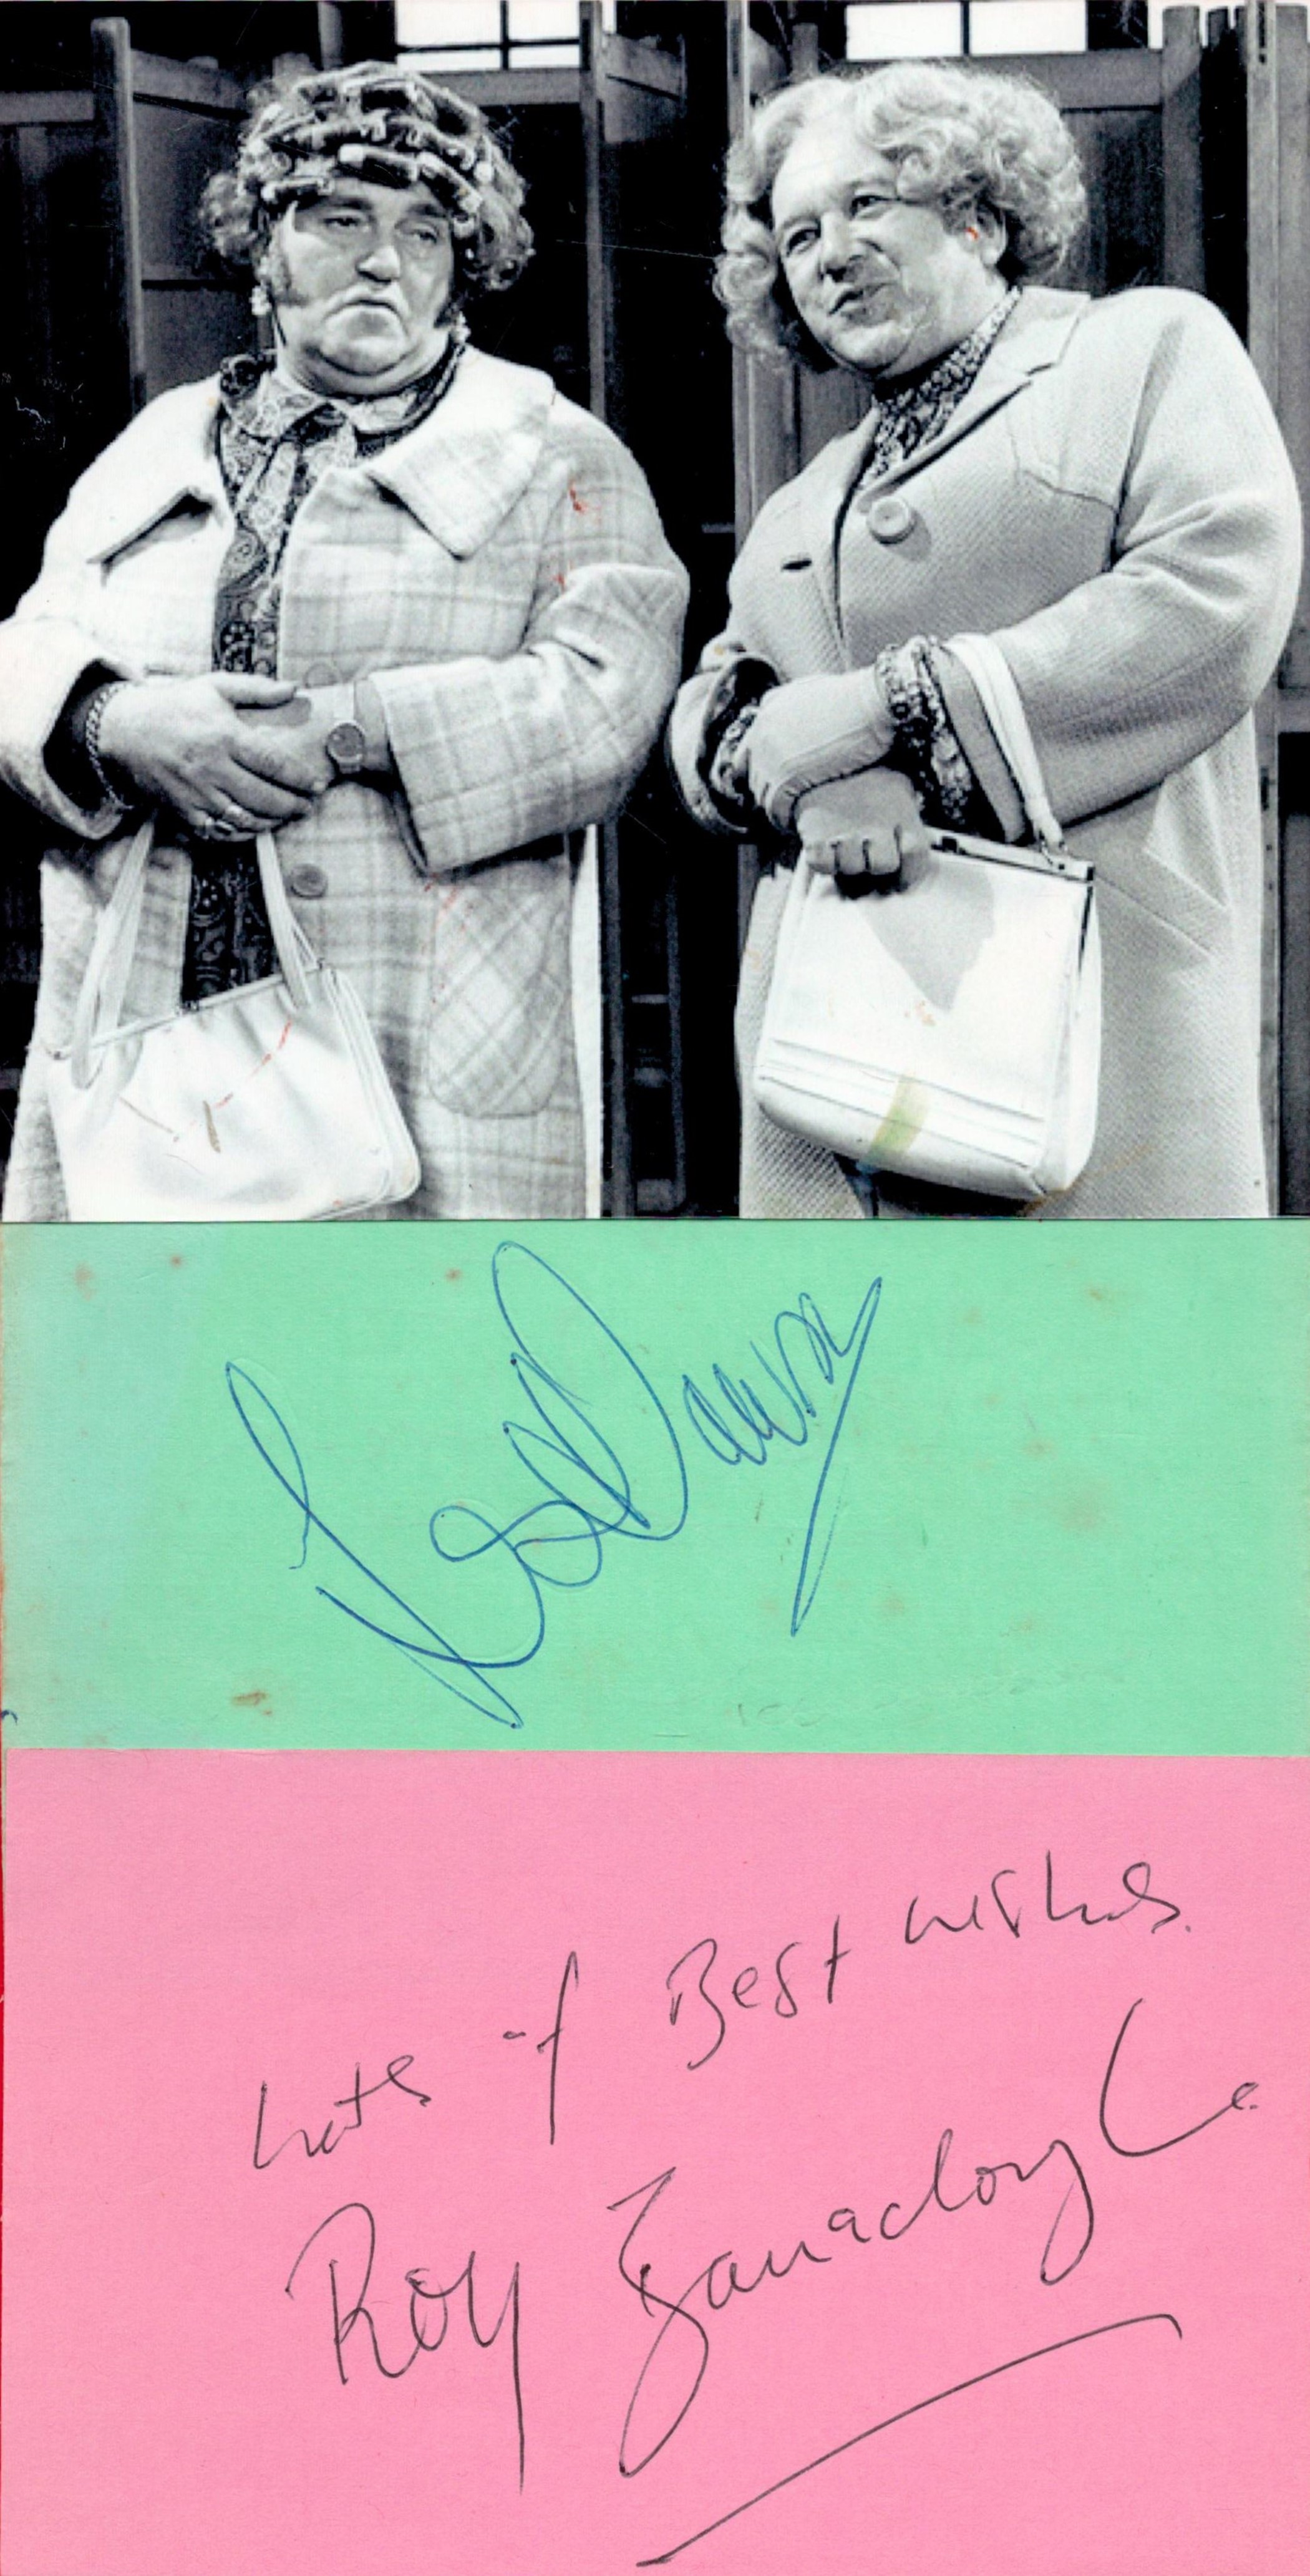 Les Dawson and Roy Barraclough Signed Separate Signature Pieces With Photo. Good condition. All